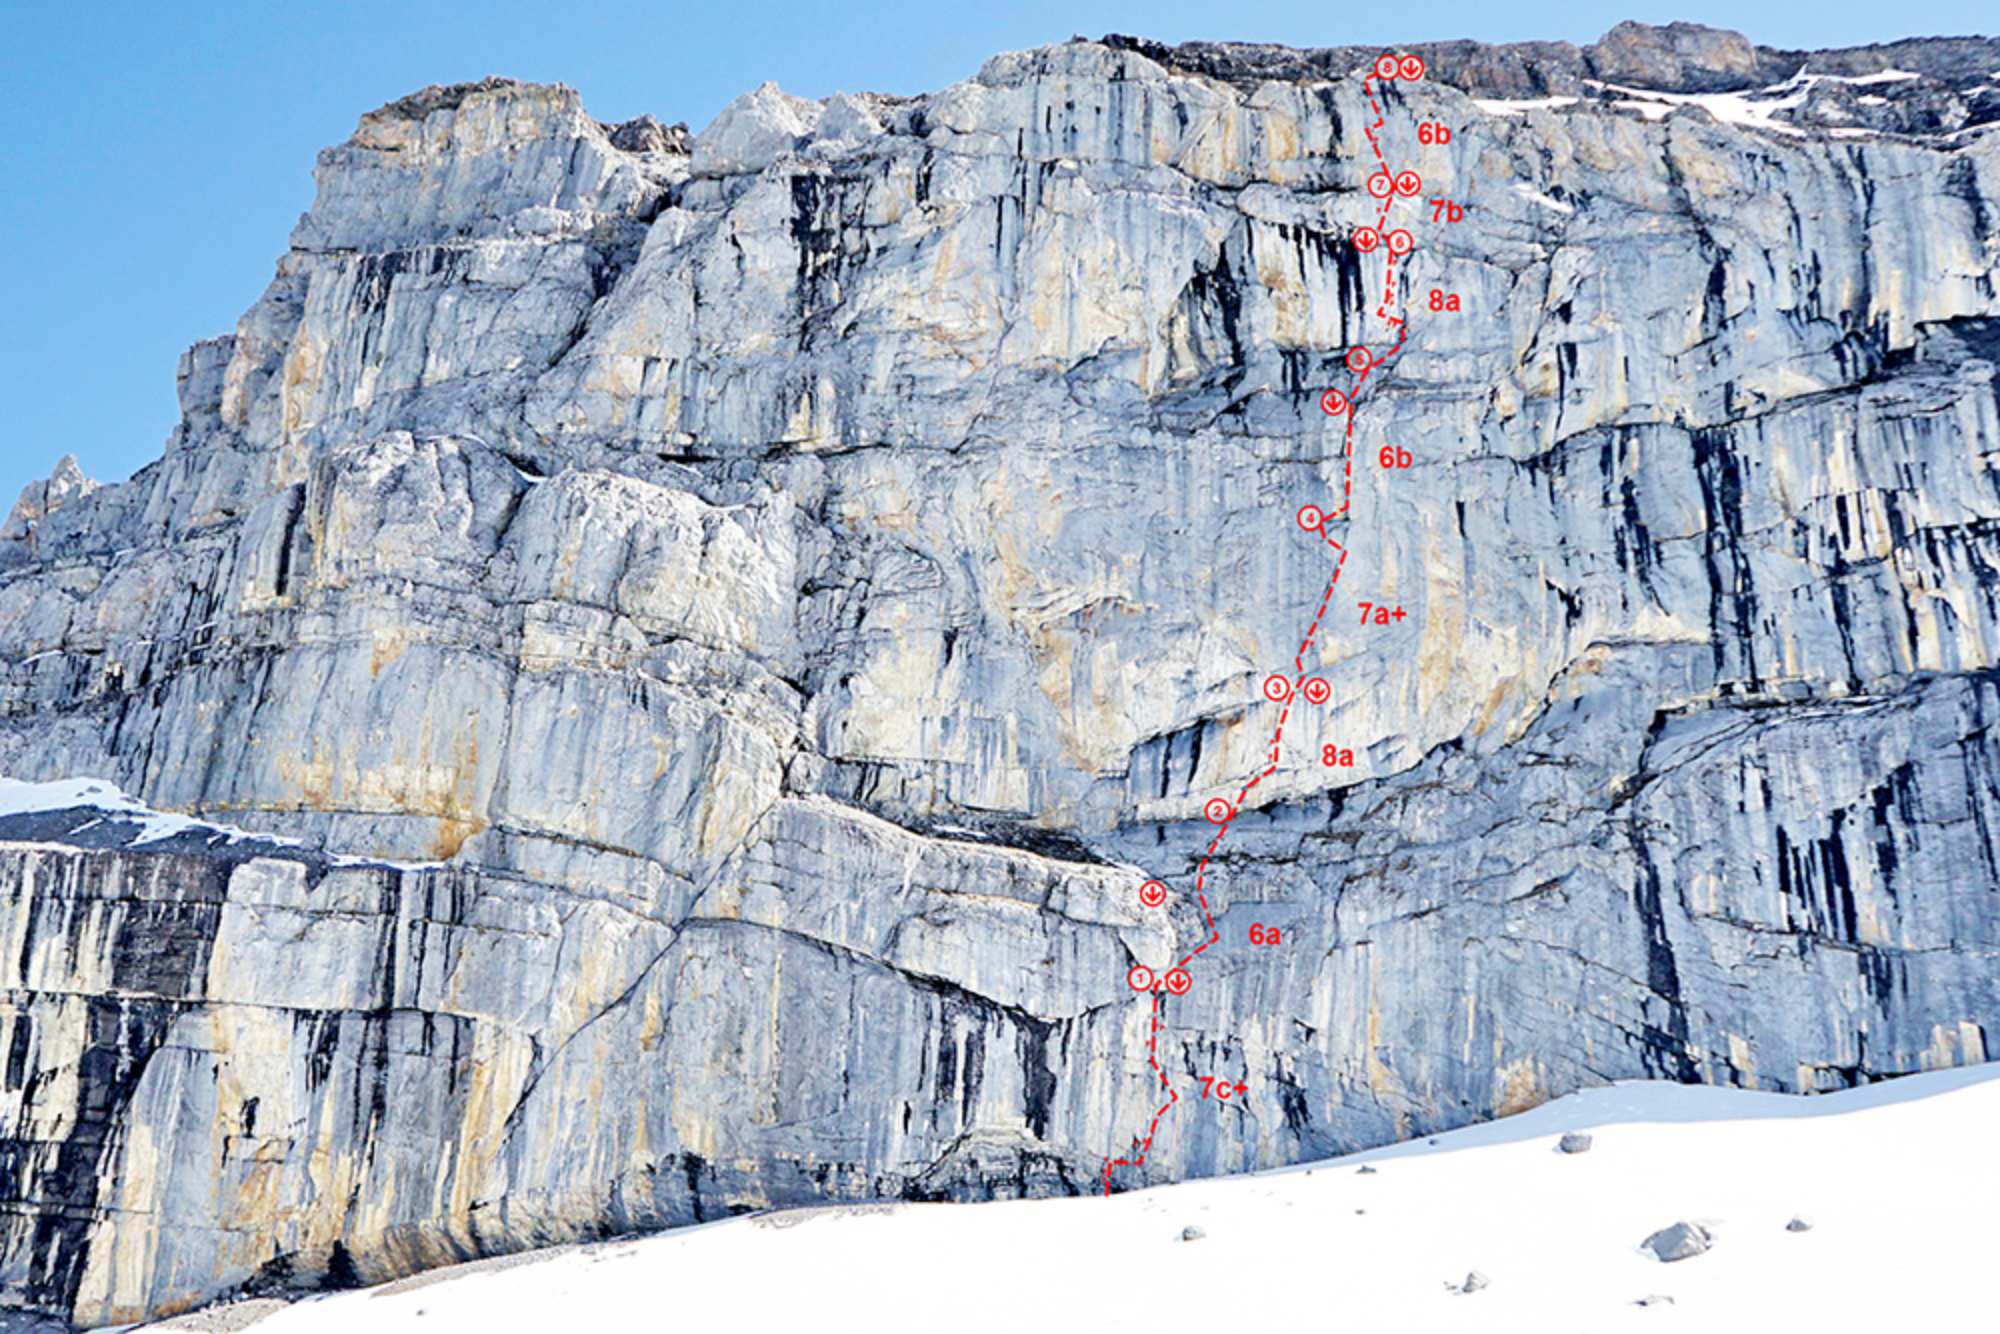 Eight-pitch Tradündition 8a (5.13d) lives in Switzerland's remote Bernese Alps.